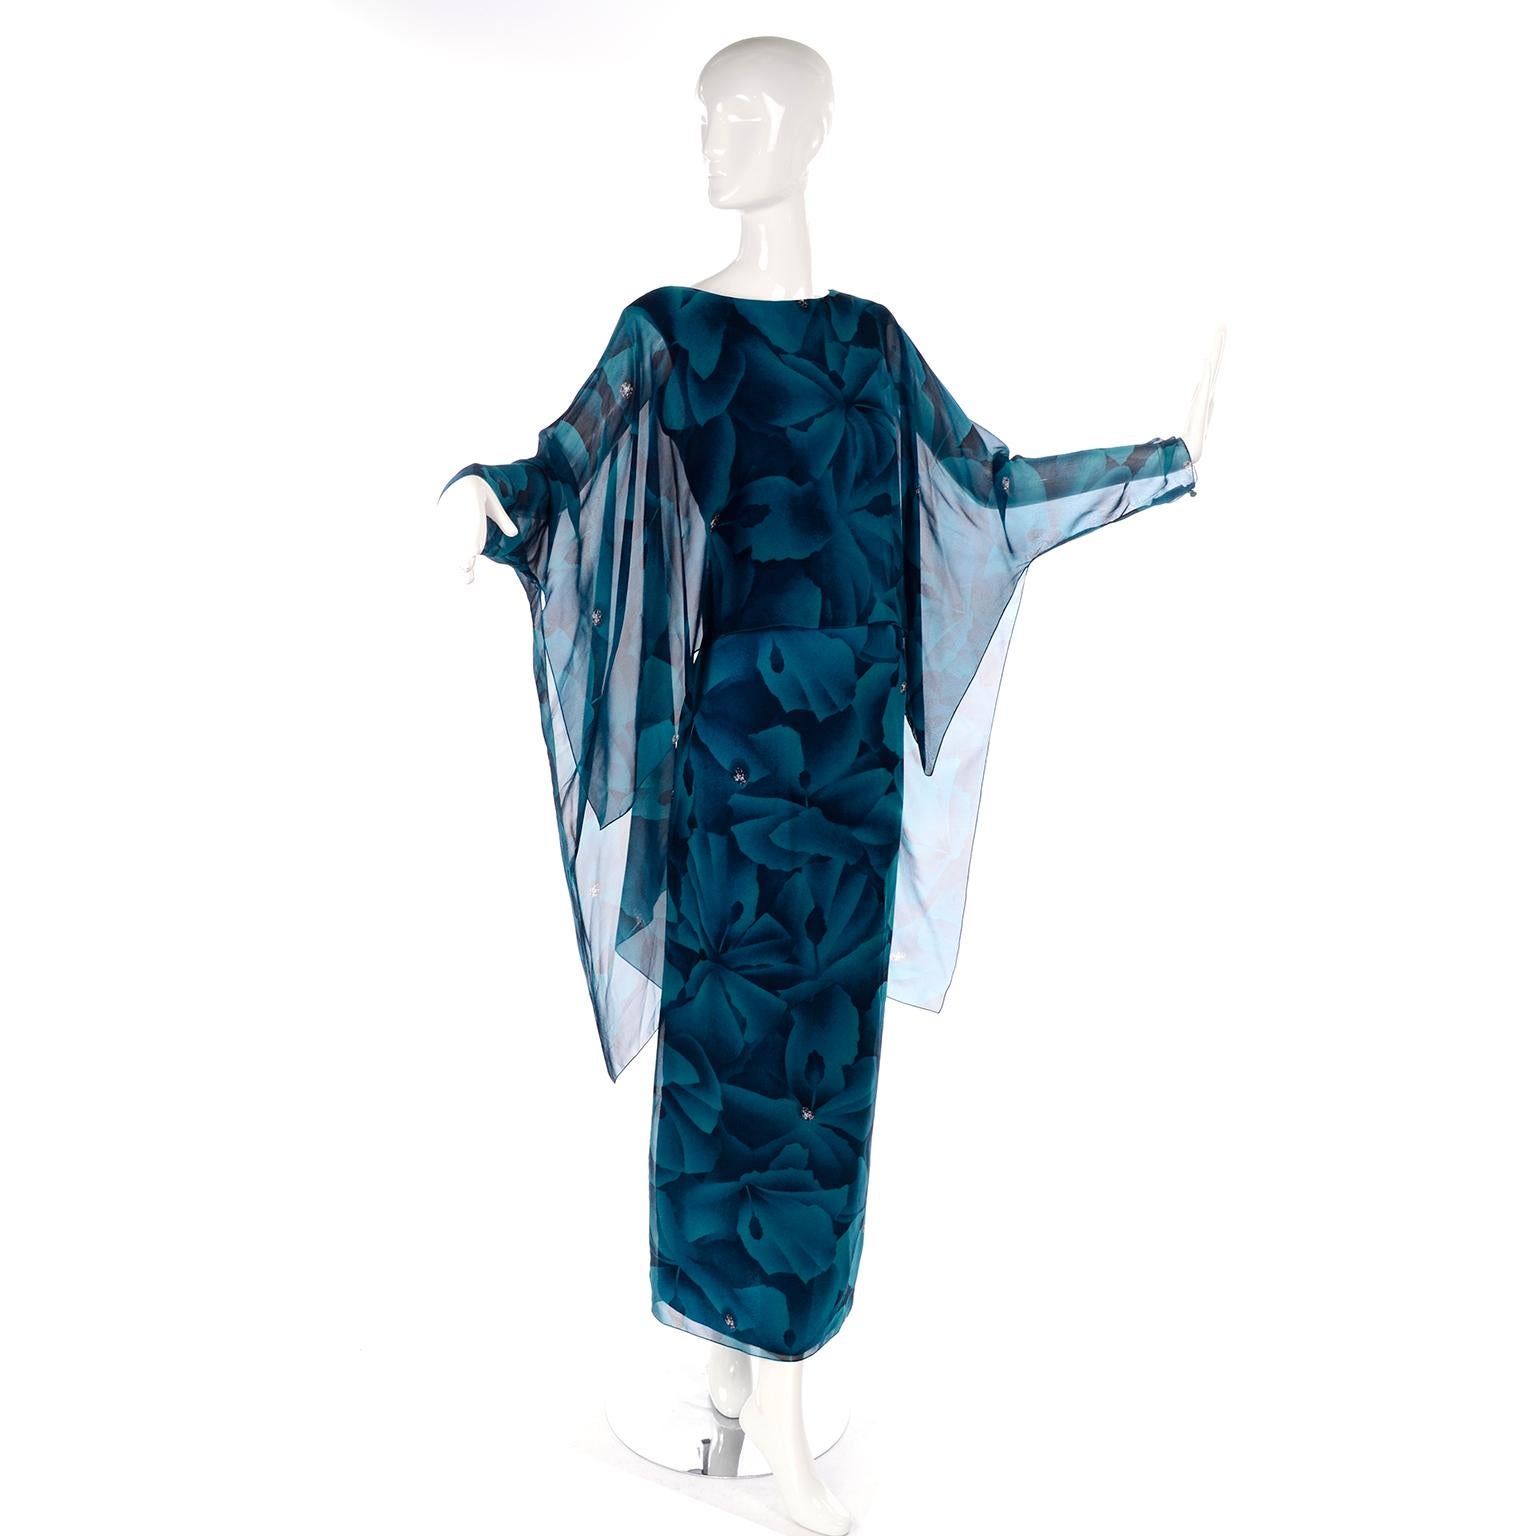 Blue Vintage Evening Dress in Bold Chiffon Print W Sheer Overlay & Dramatic Sleeves